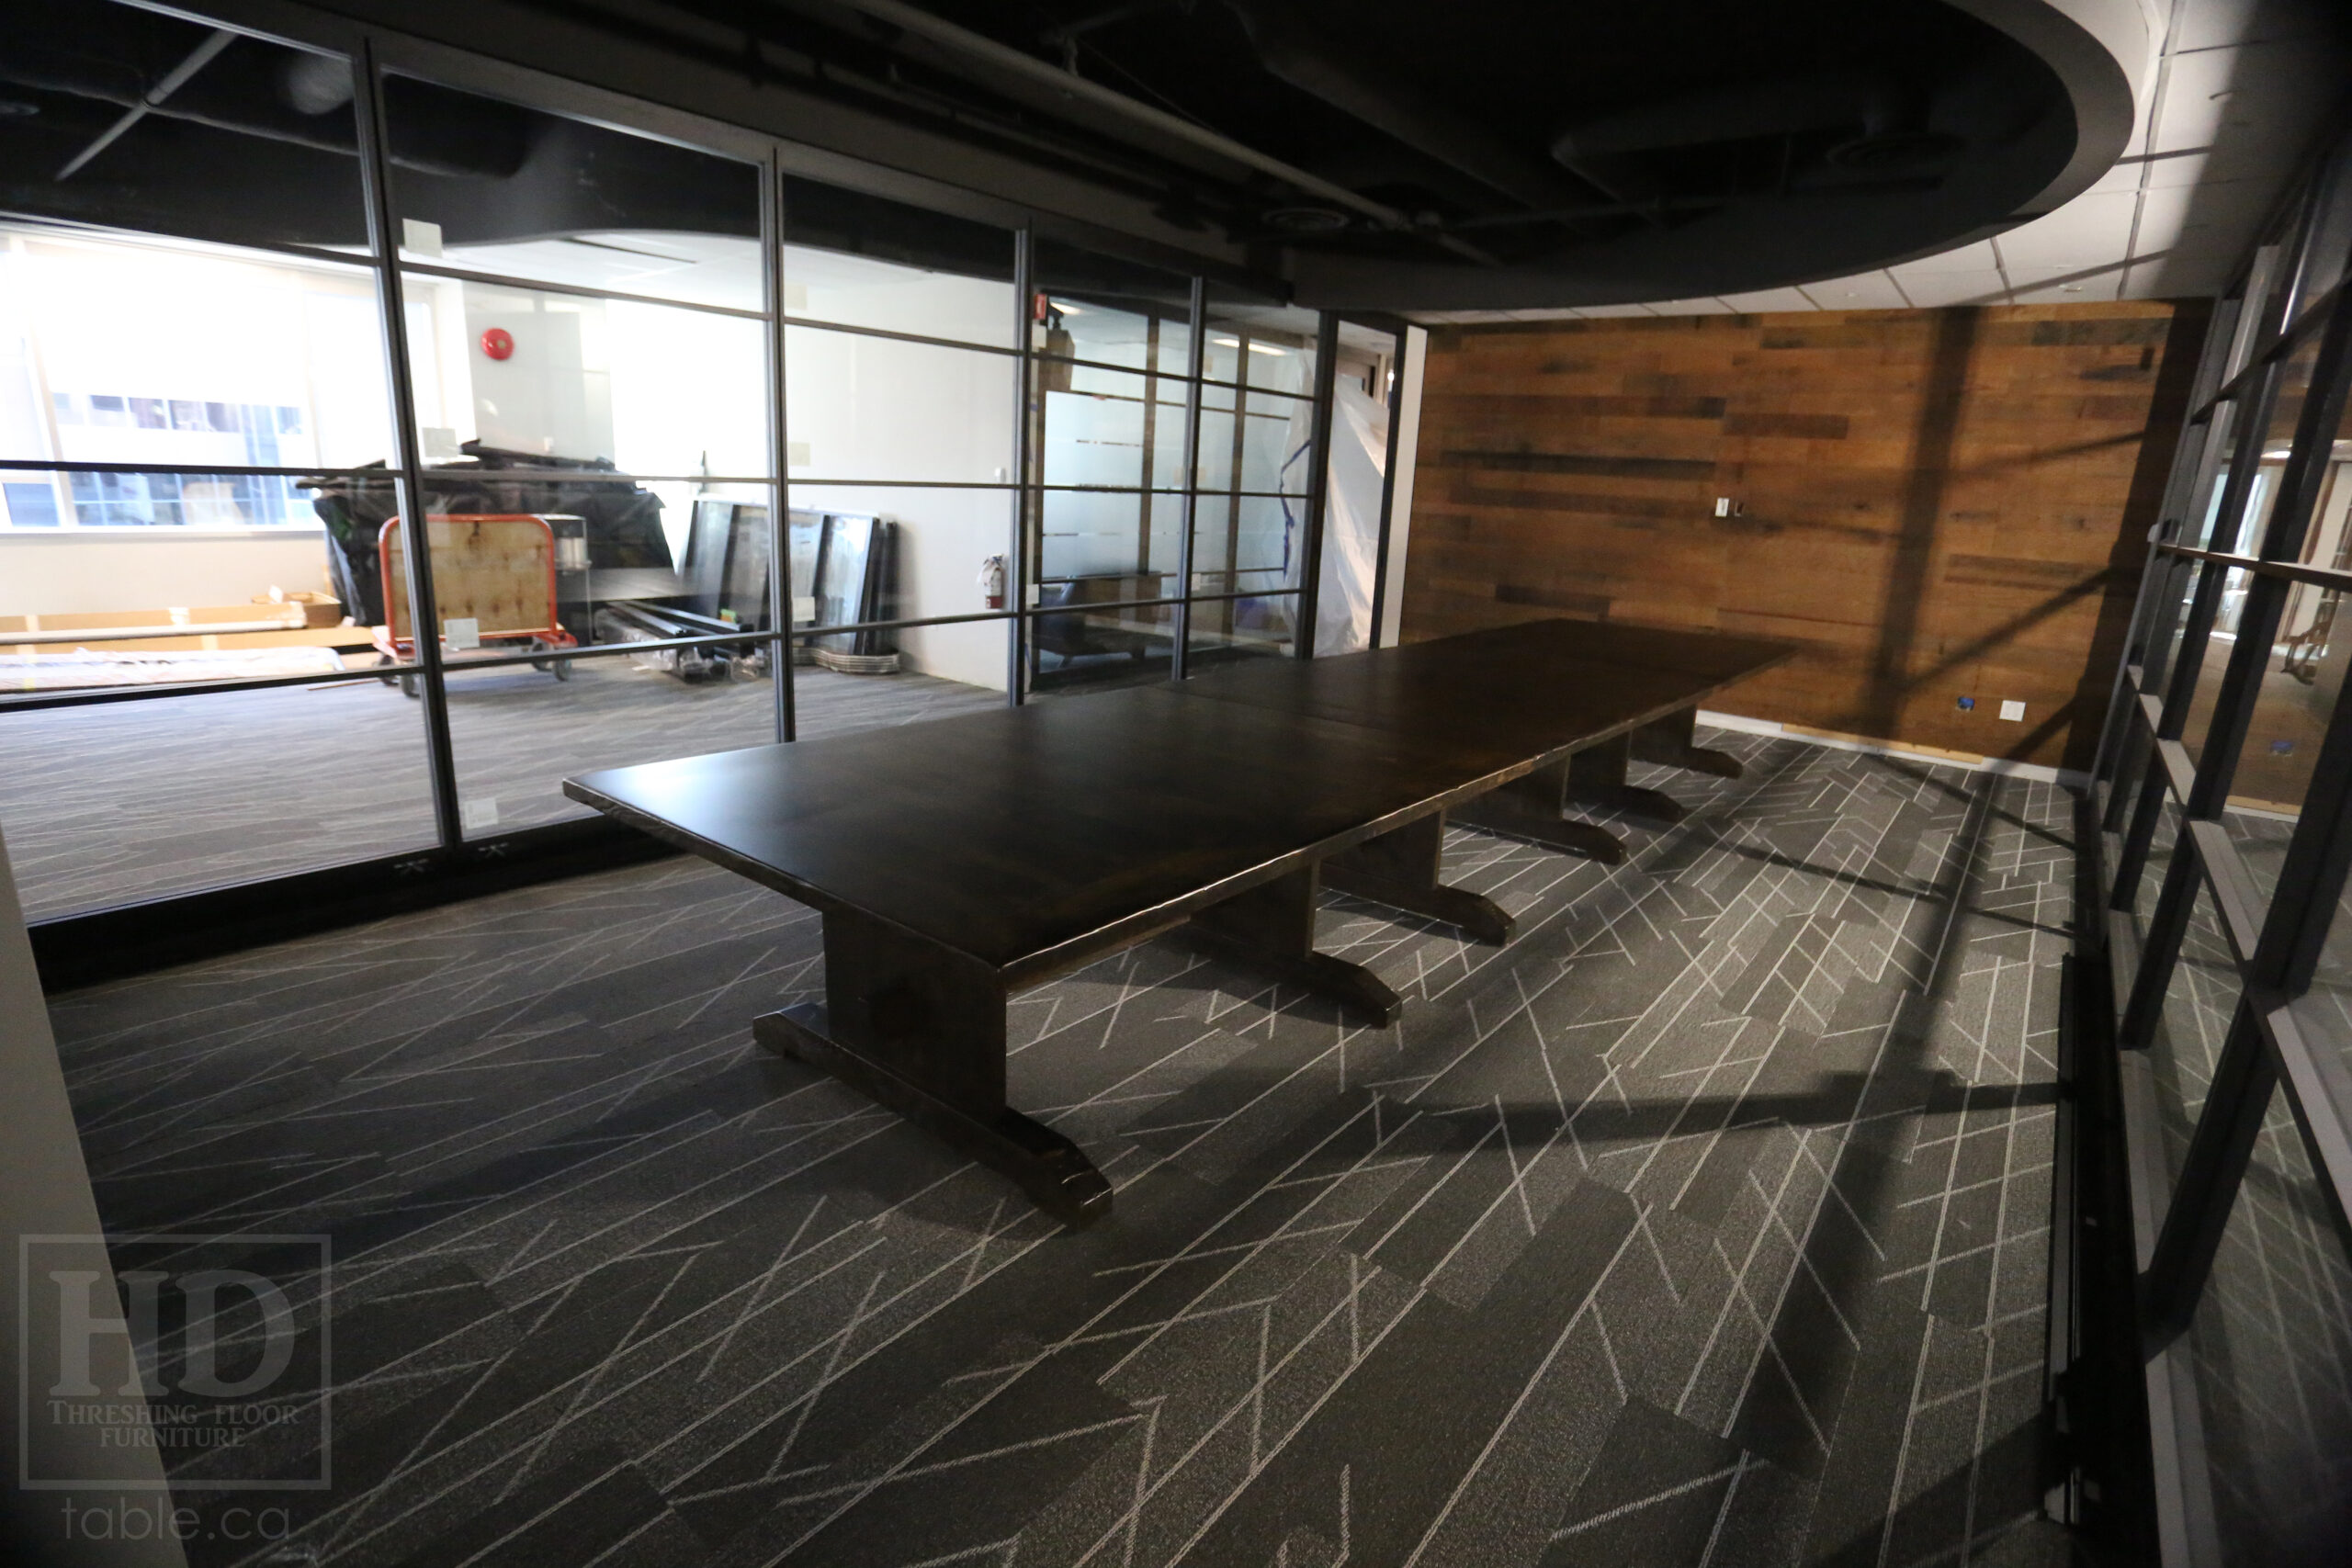 21' Ontario Barnwood Boardroom Table we made for an Ottawa Company - 60" wide - Trestle Base - Old Growth Hemlock Threshing Floor Construction - Onsite final dowling 1/3 1/3 1/3 - 2 Posts Per 1/3 -Original edges & distressing maintained - Black Stain Option - Premium epoxy + matte polyurethane finish  - www.table.ca